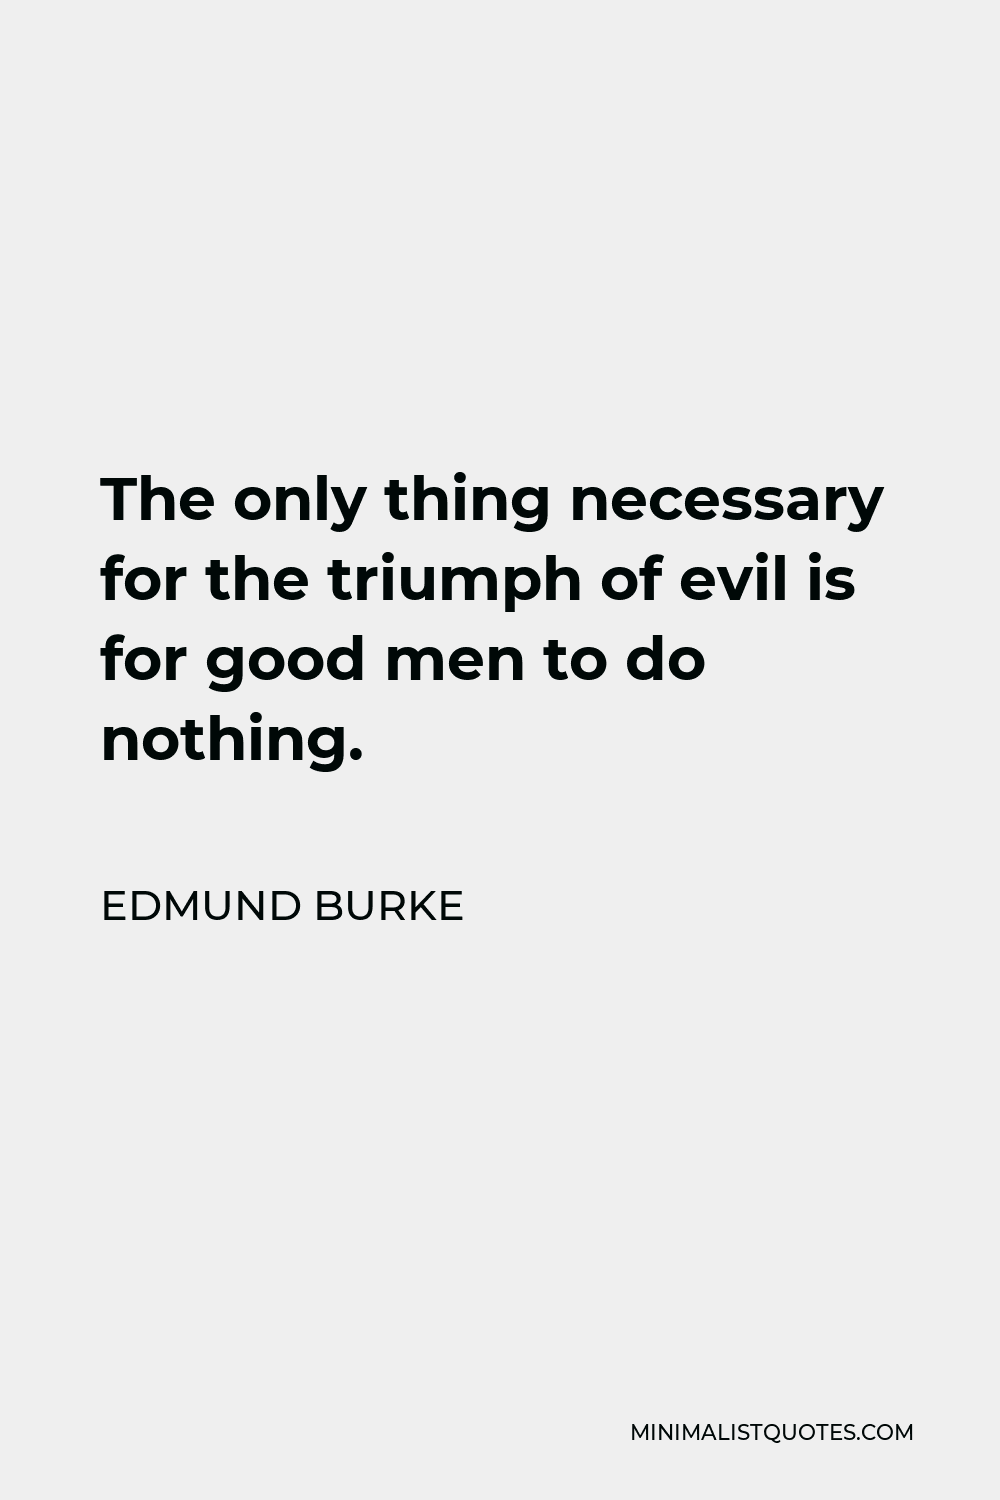 Edmund Burke Quote - The only thing necessary for the triumph of evil is for good men to do nothing.